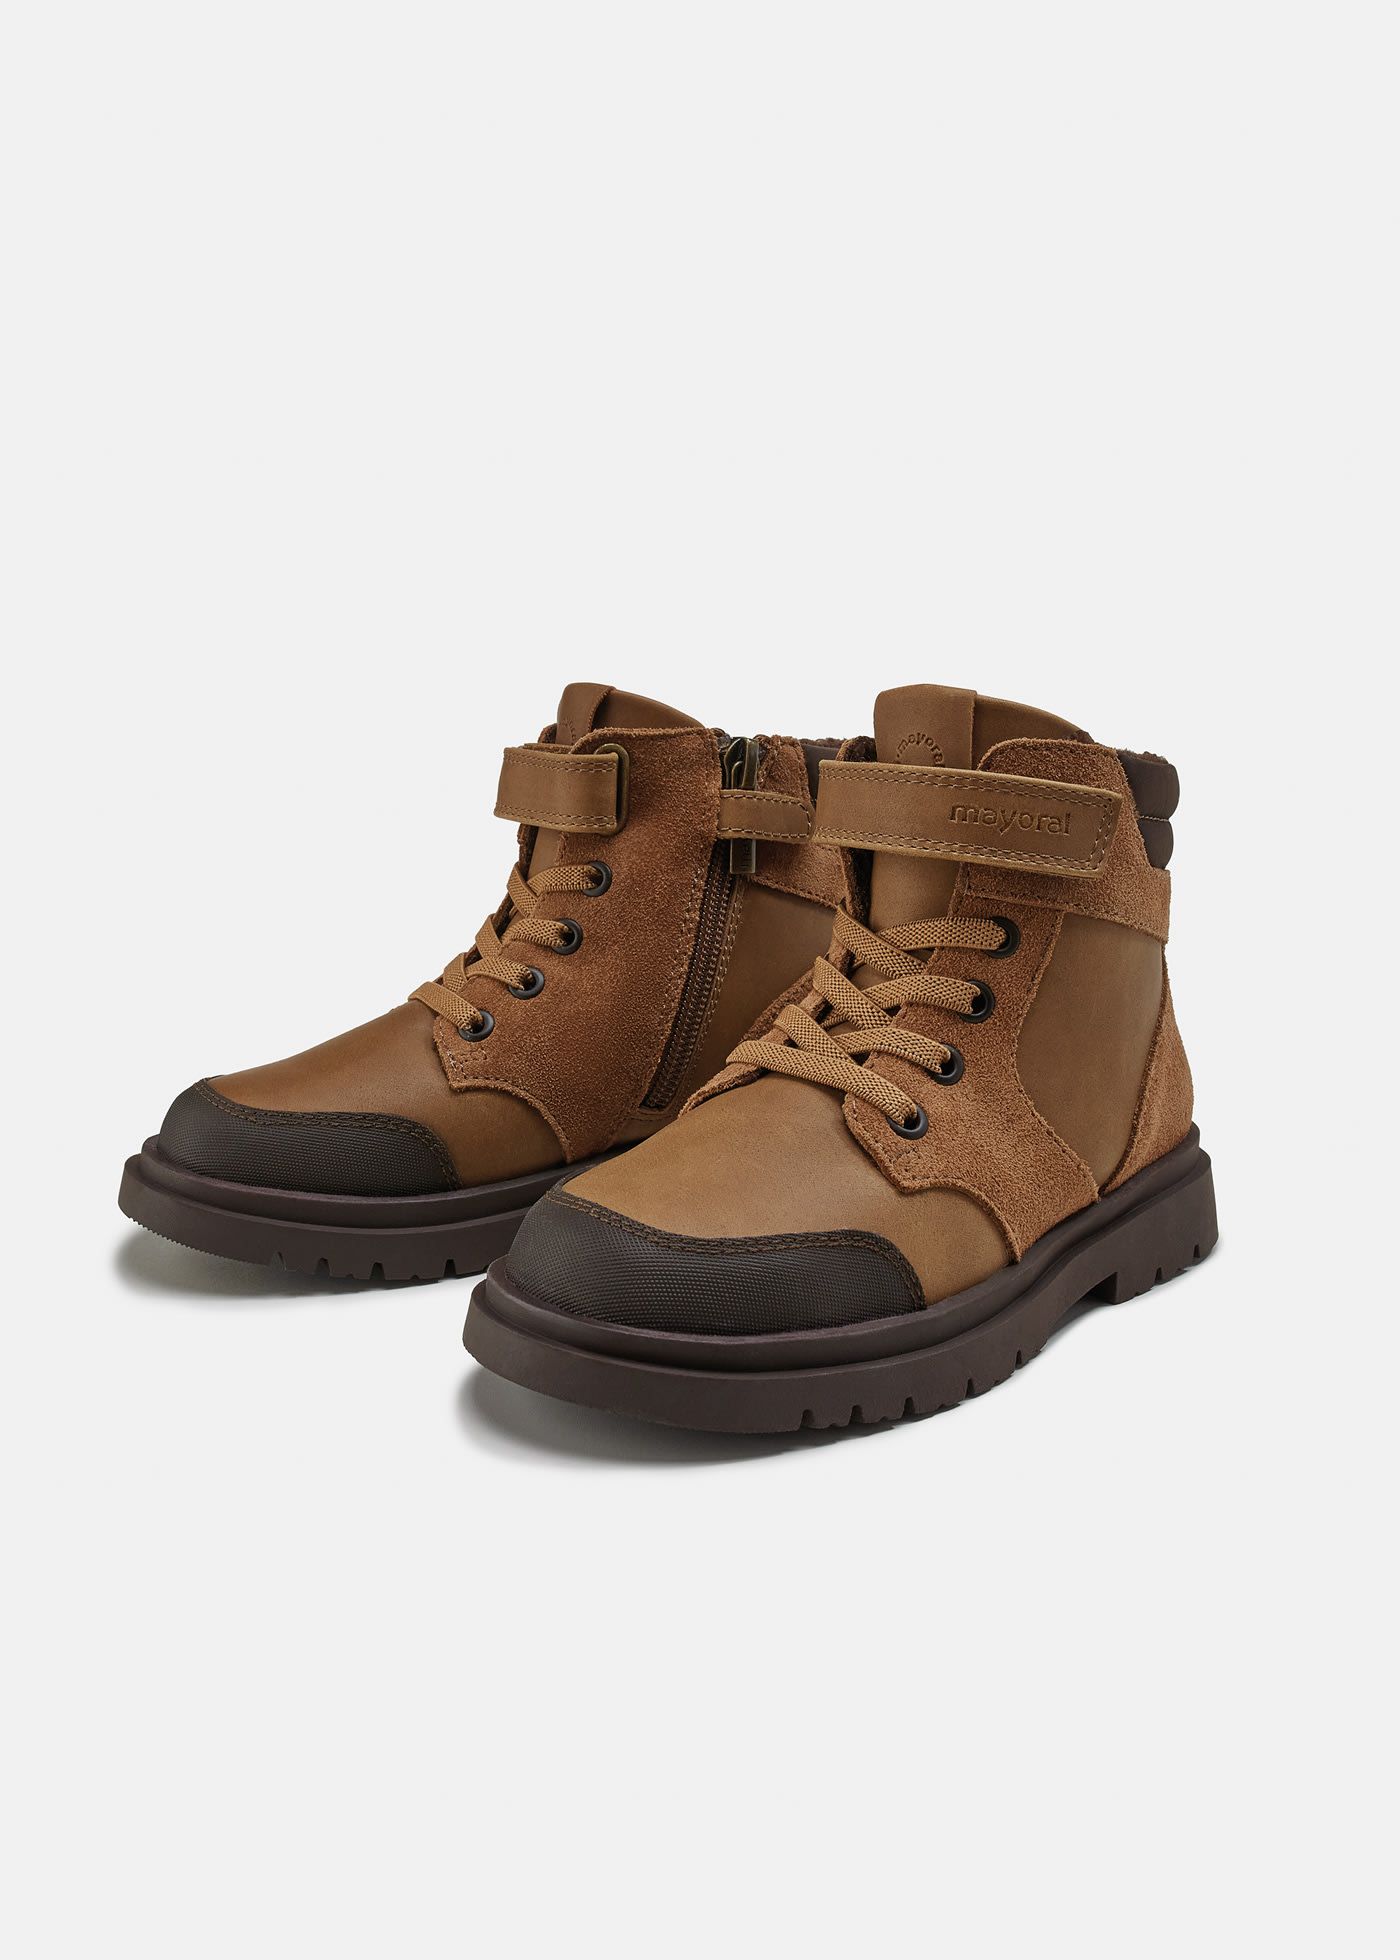 Boy mountain ankle boots sustainable leather